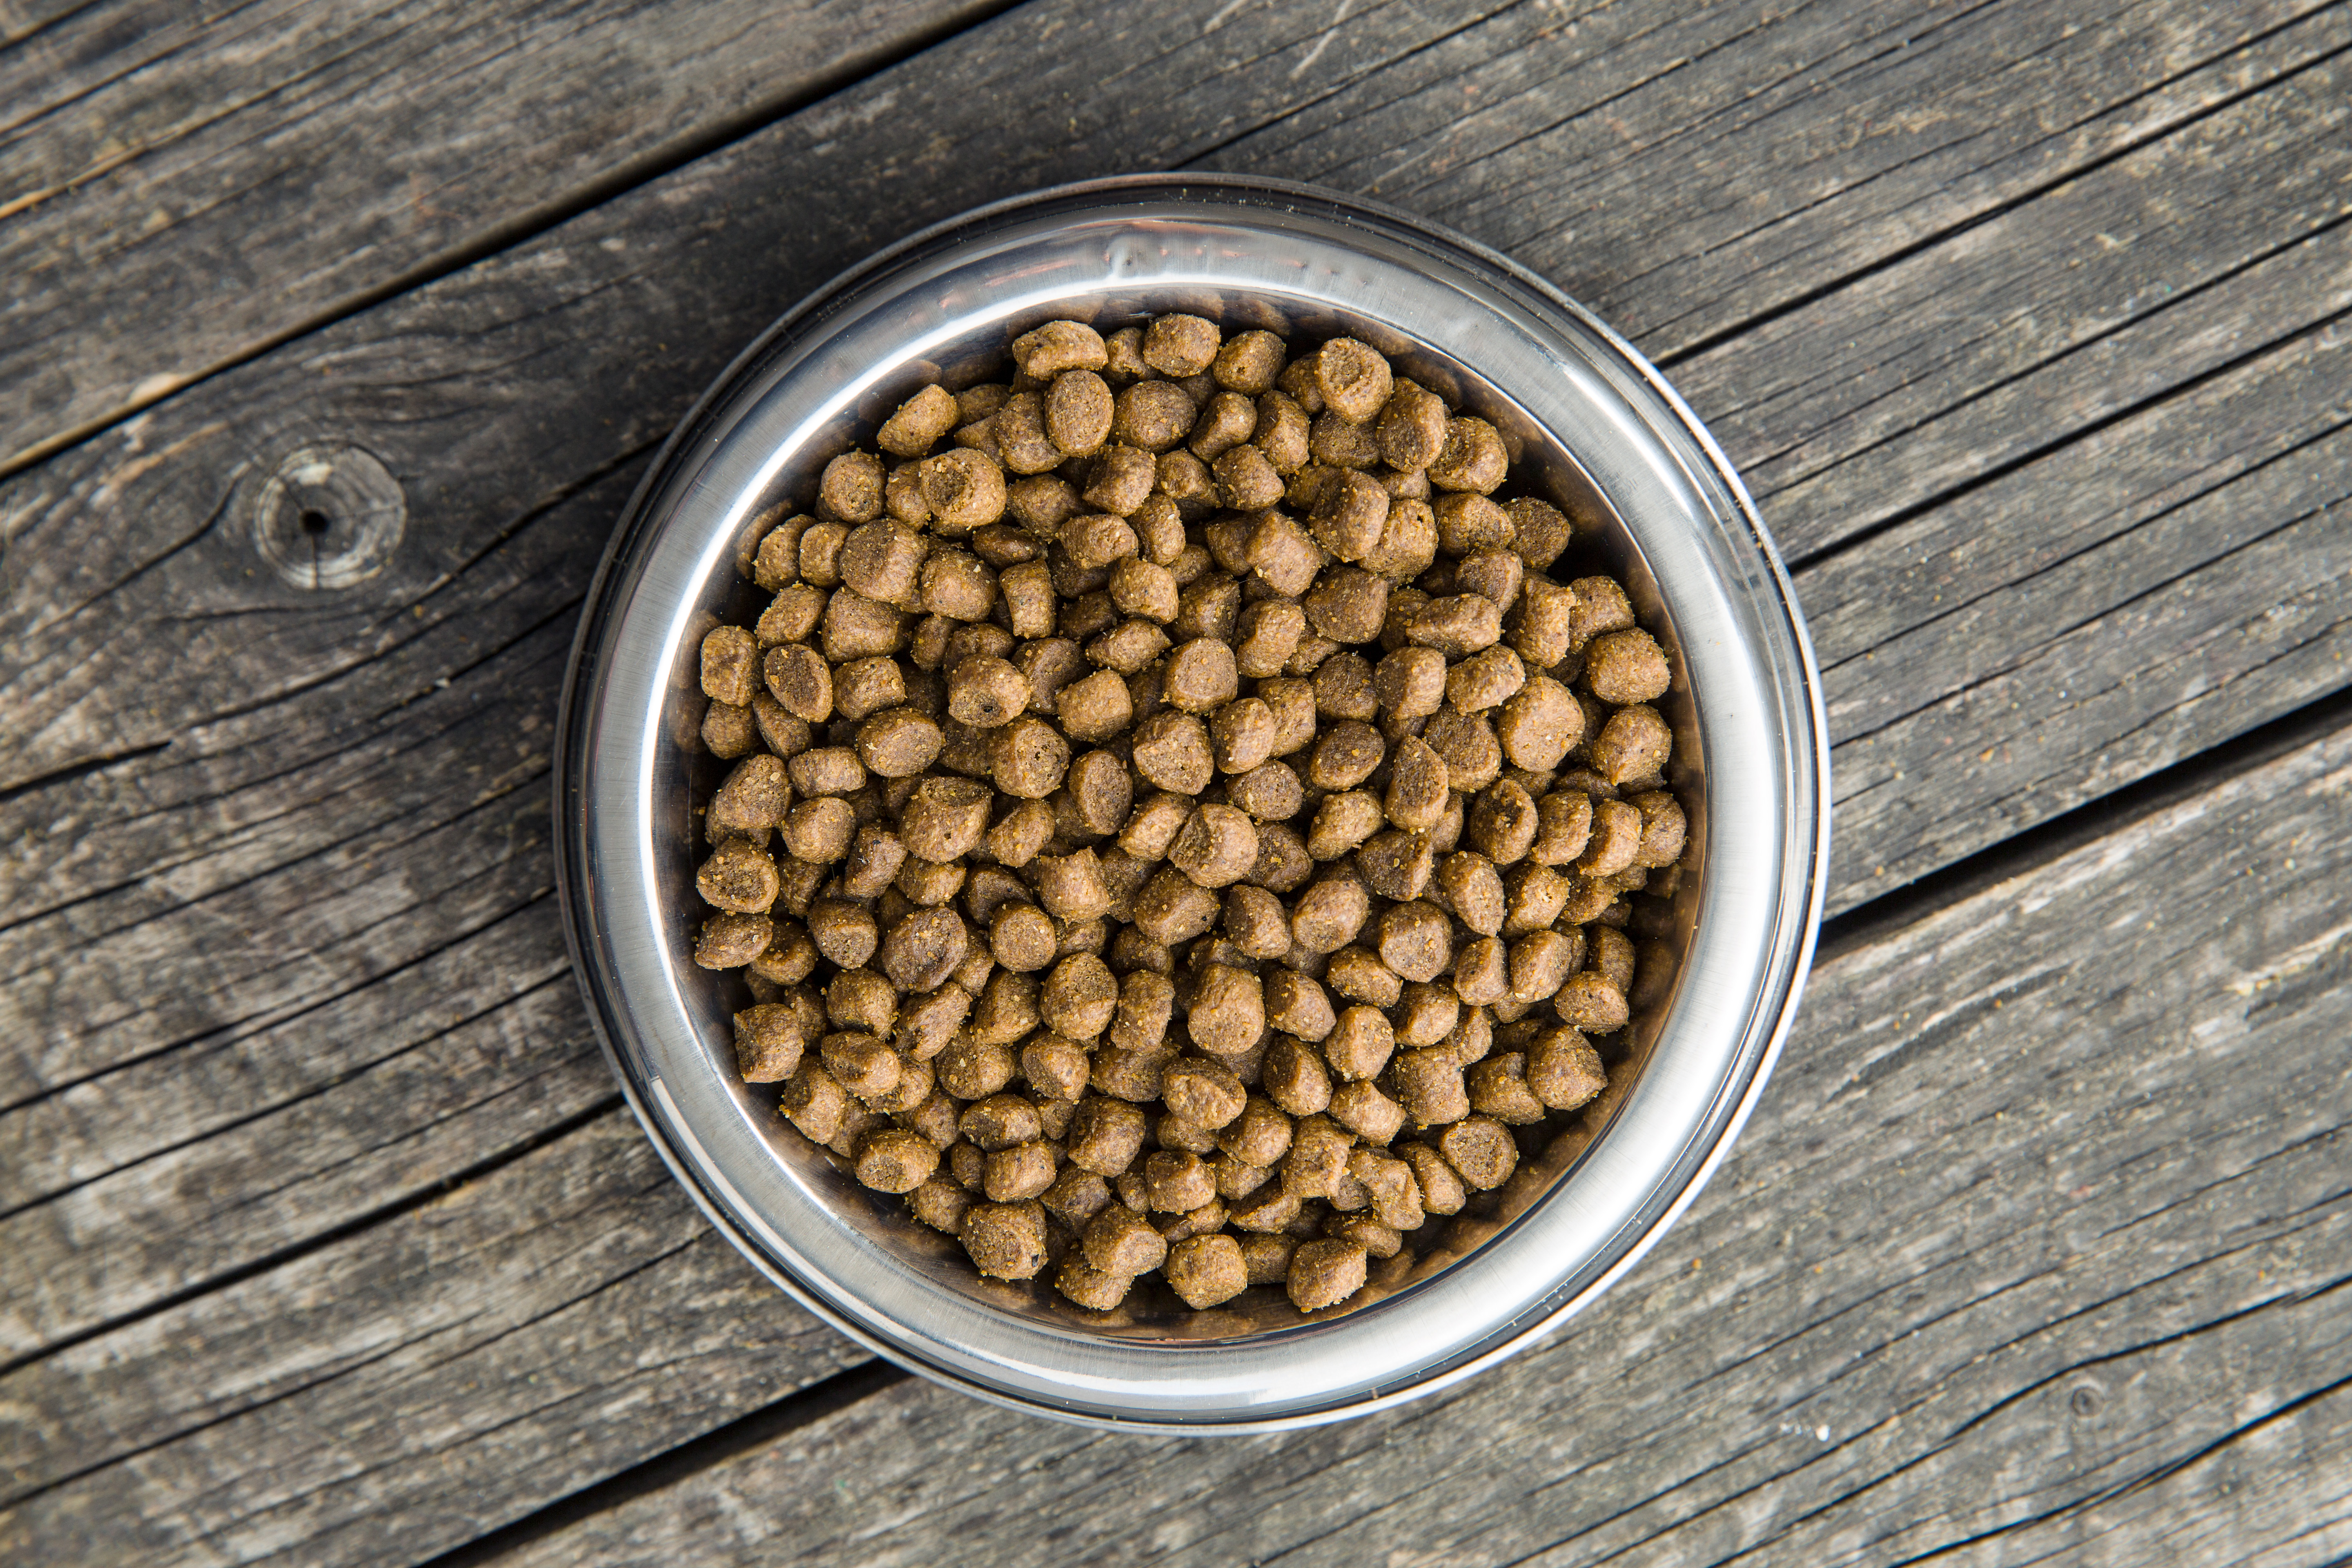 how long will dry dog food stay fresh